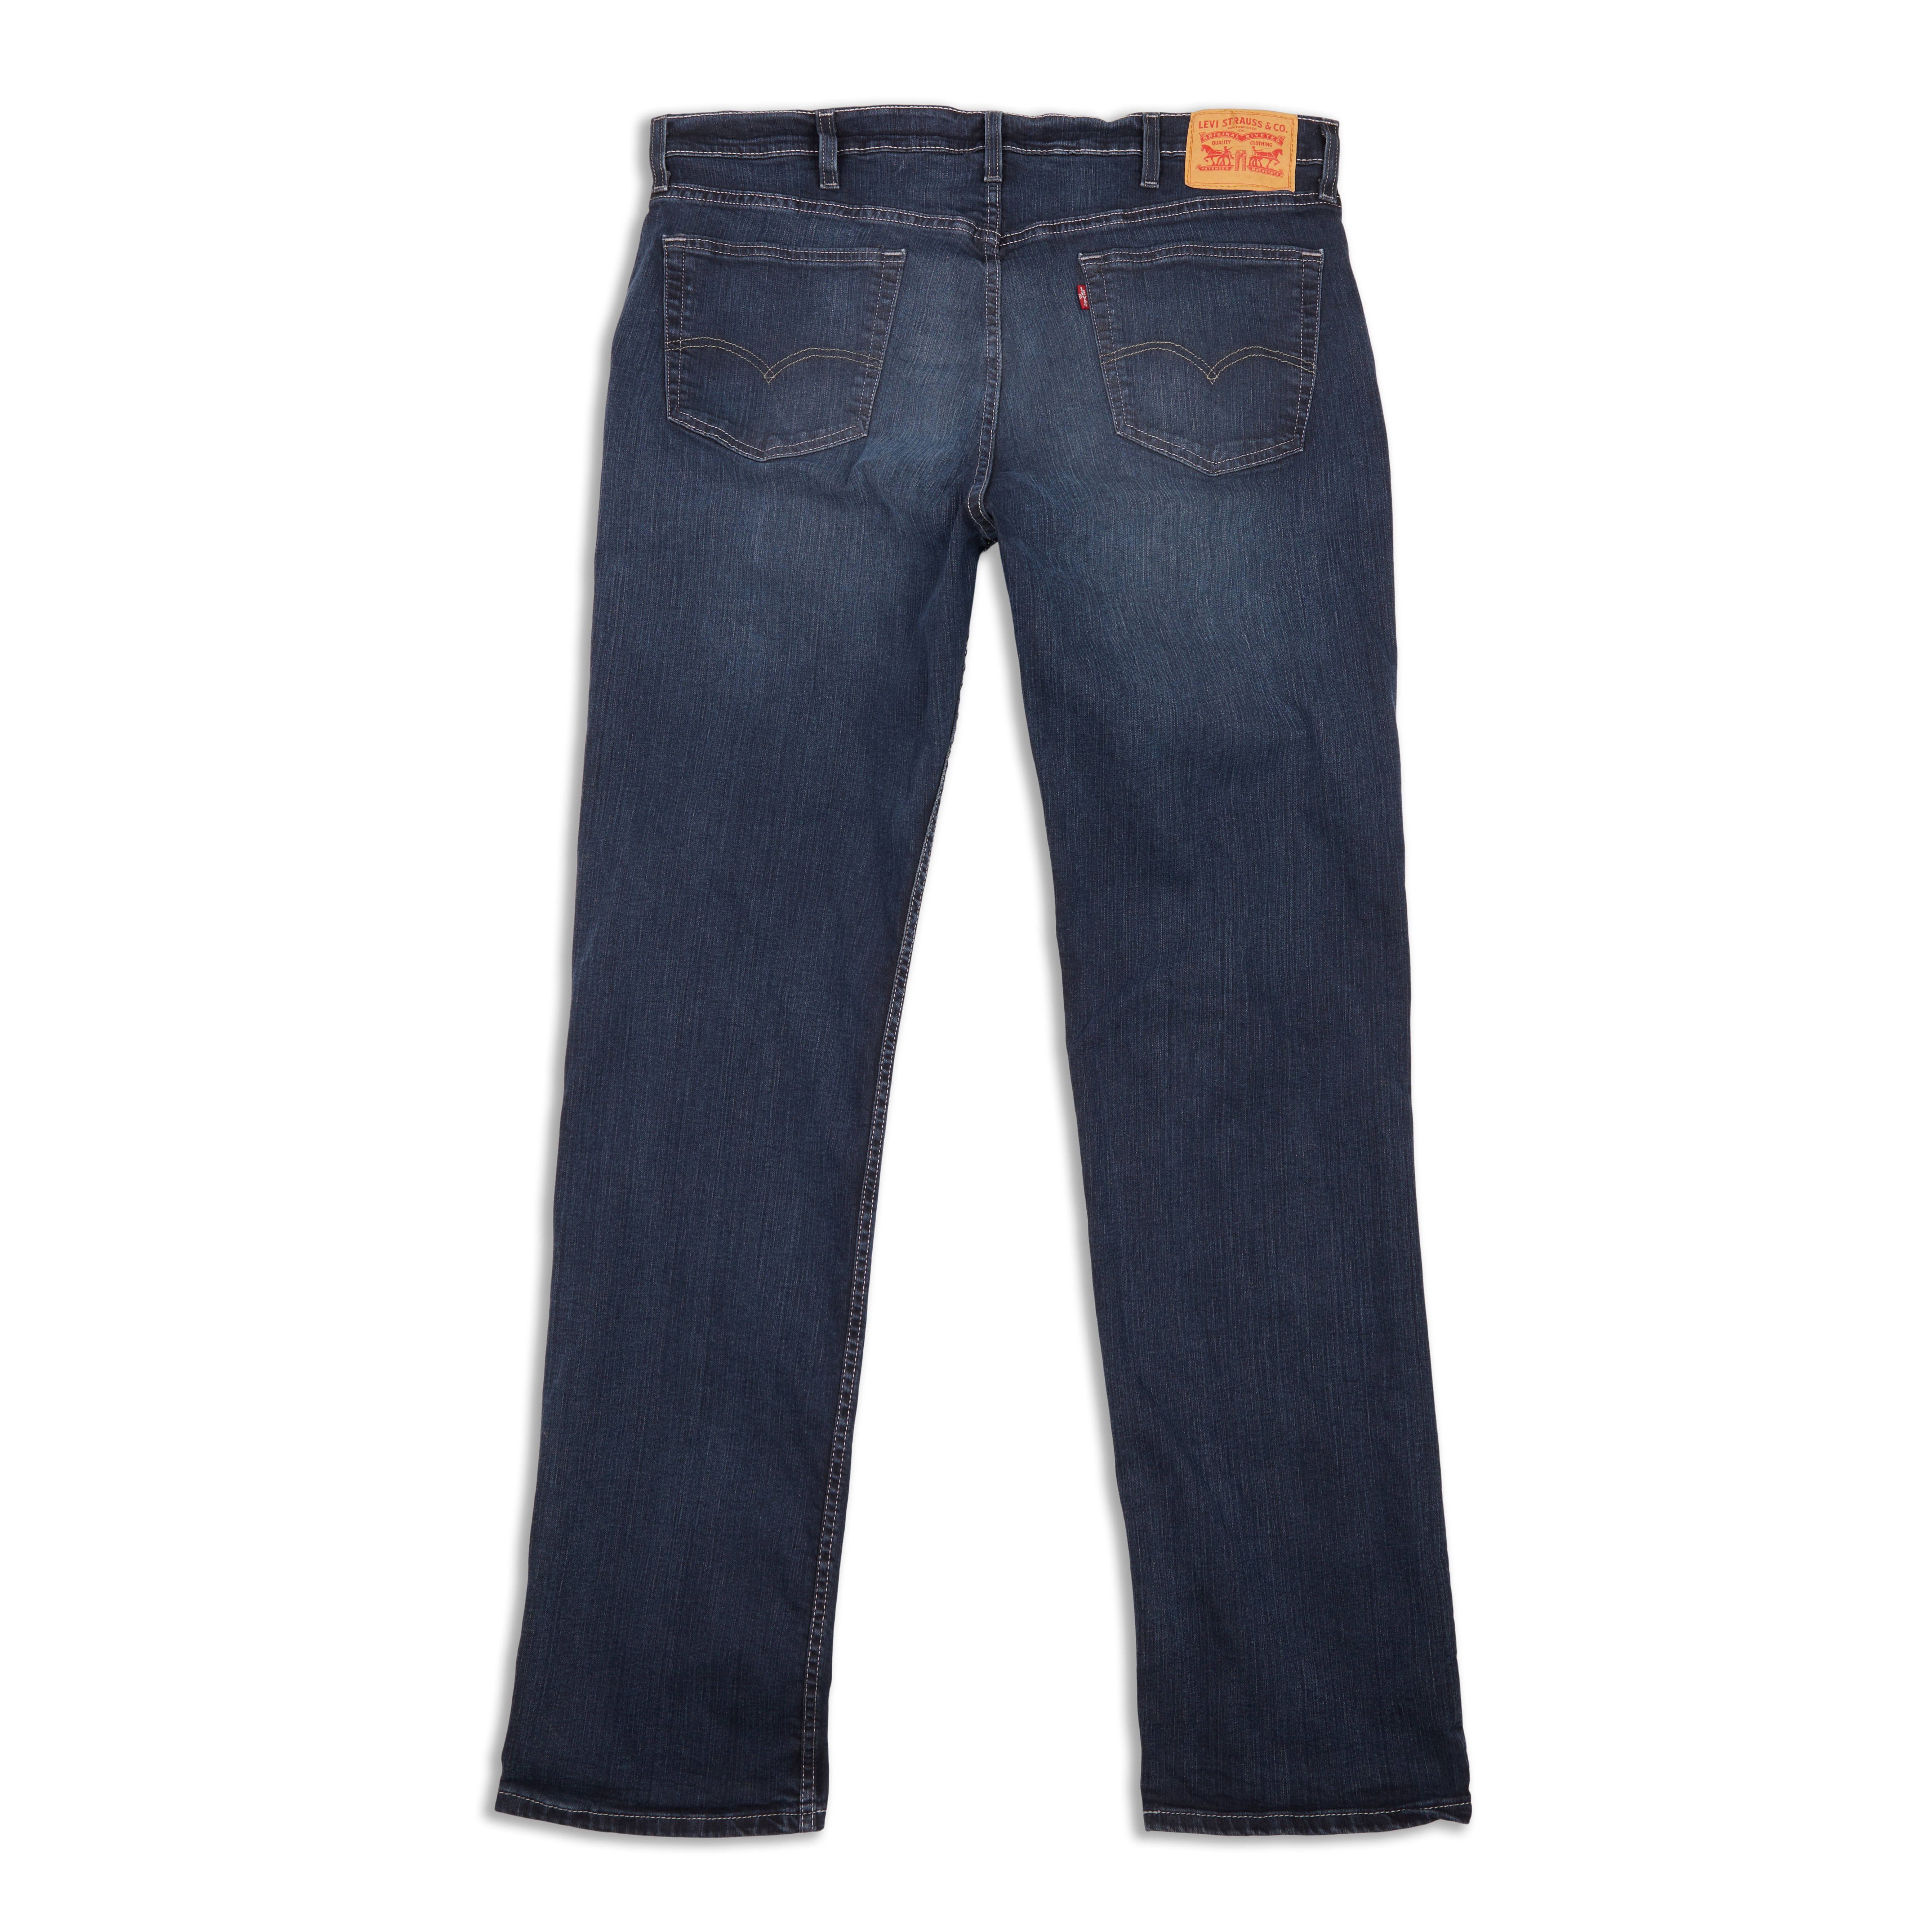 Levis 559™ Relaxed Straight Men's Jeans (Big & Tall) Navarro